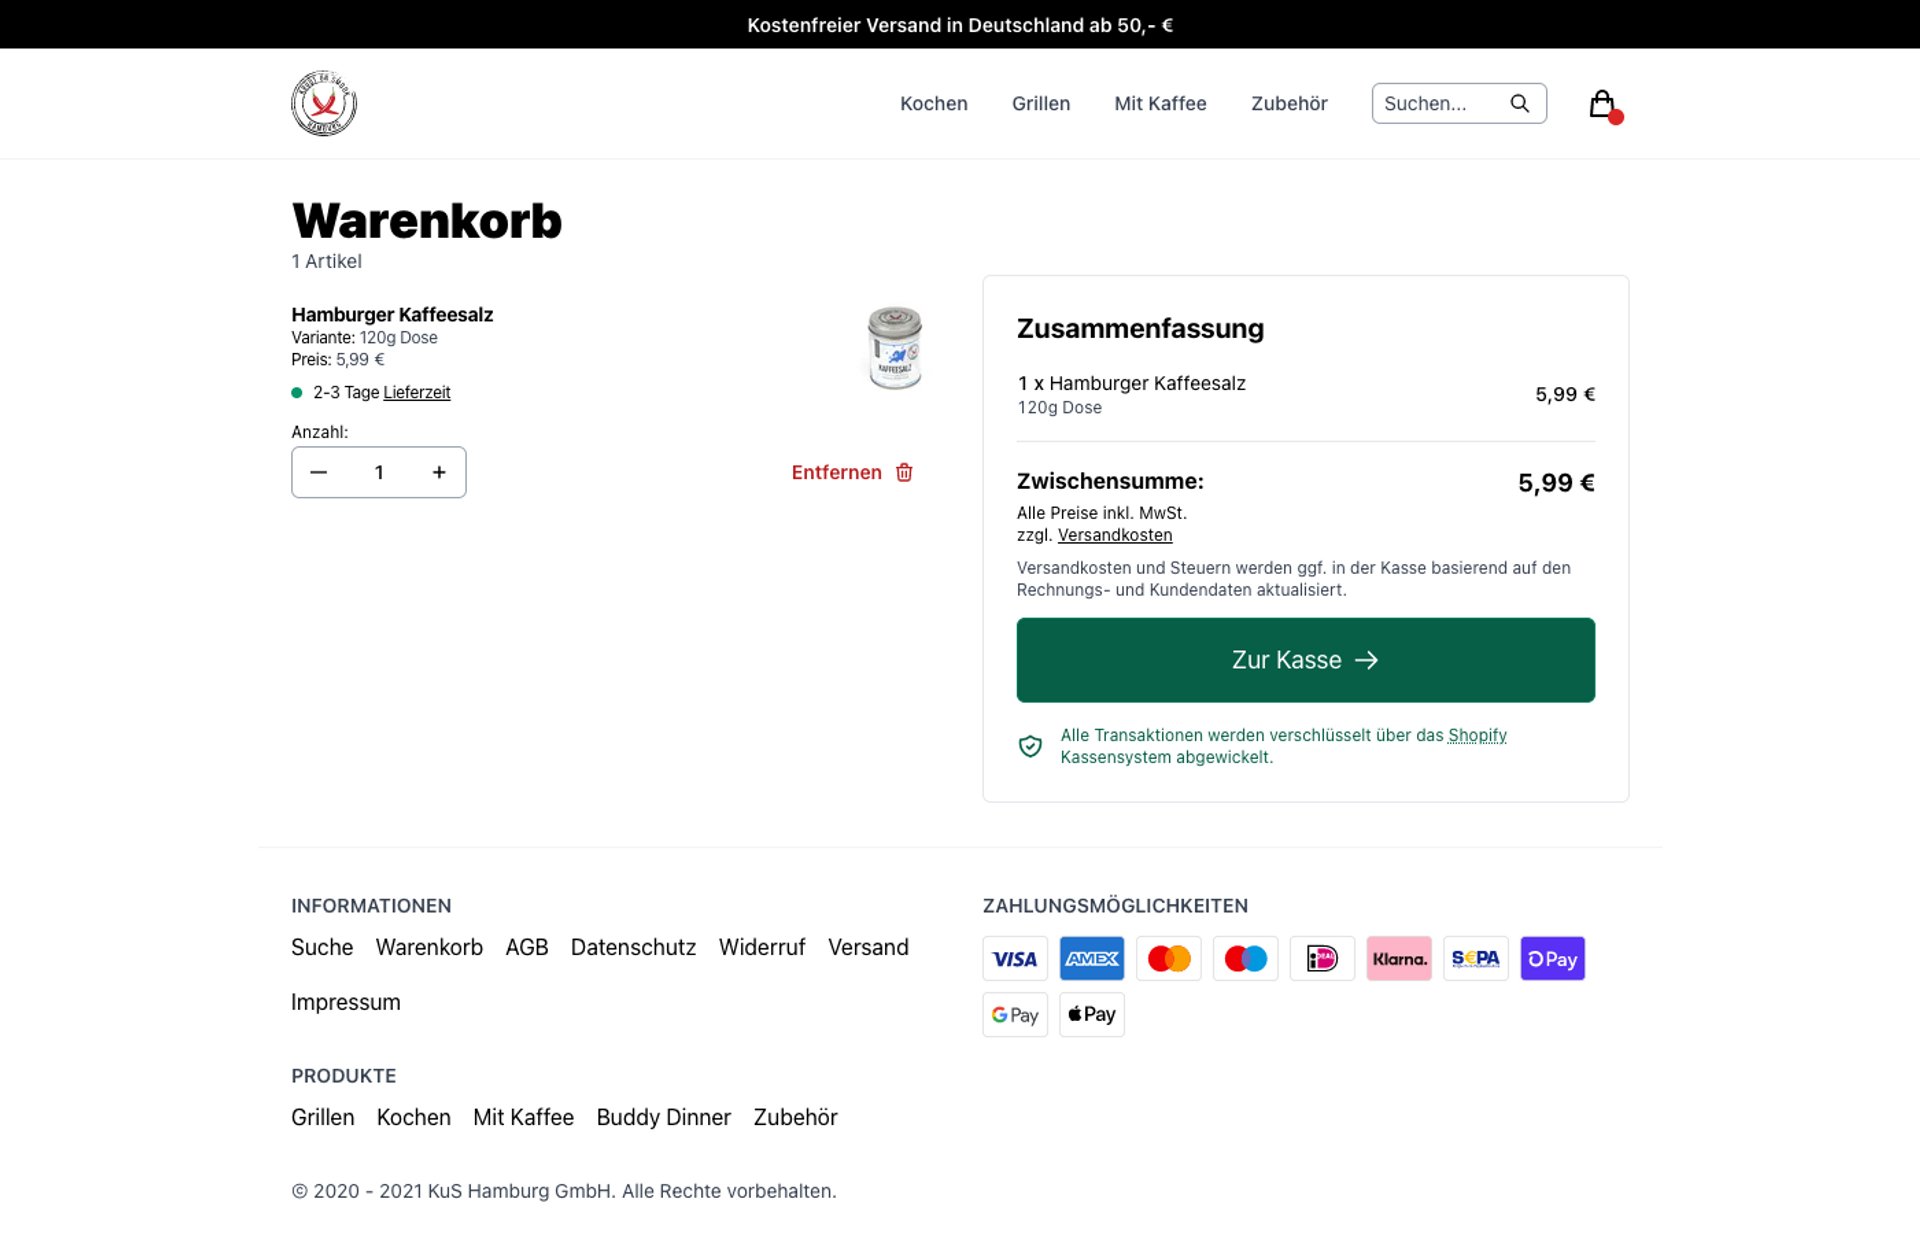 Overview of the checkout page